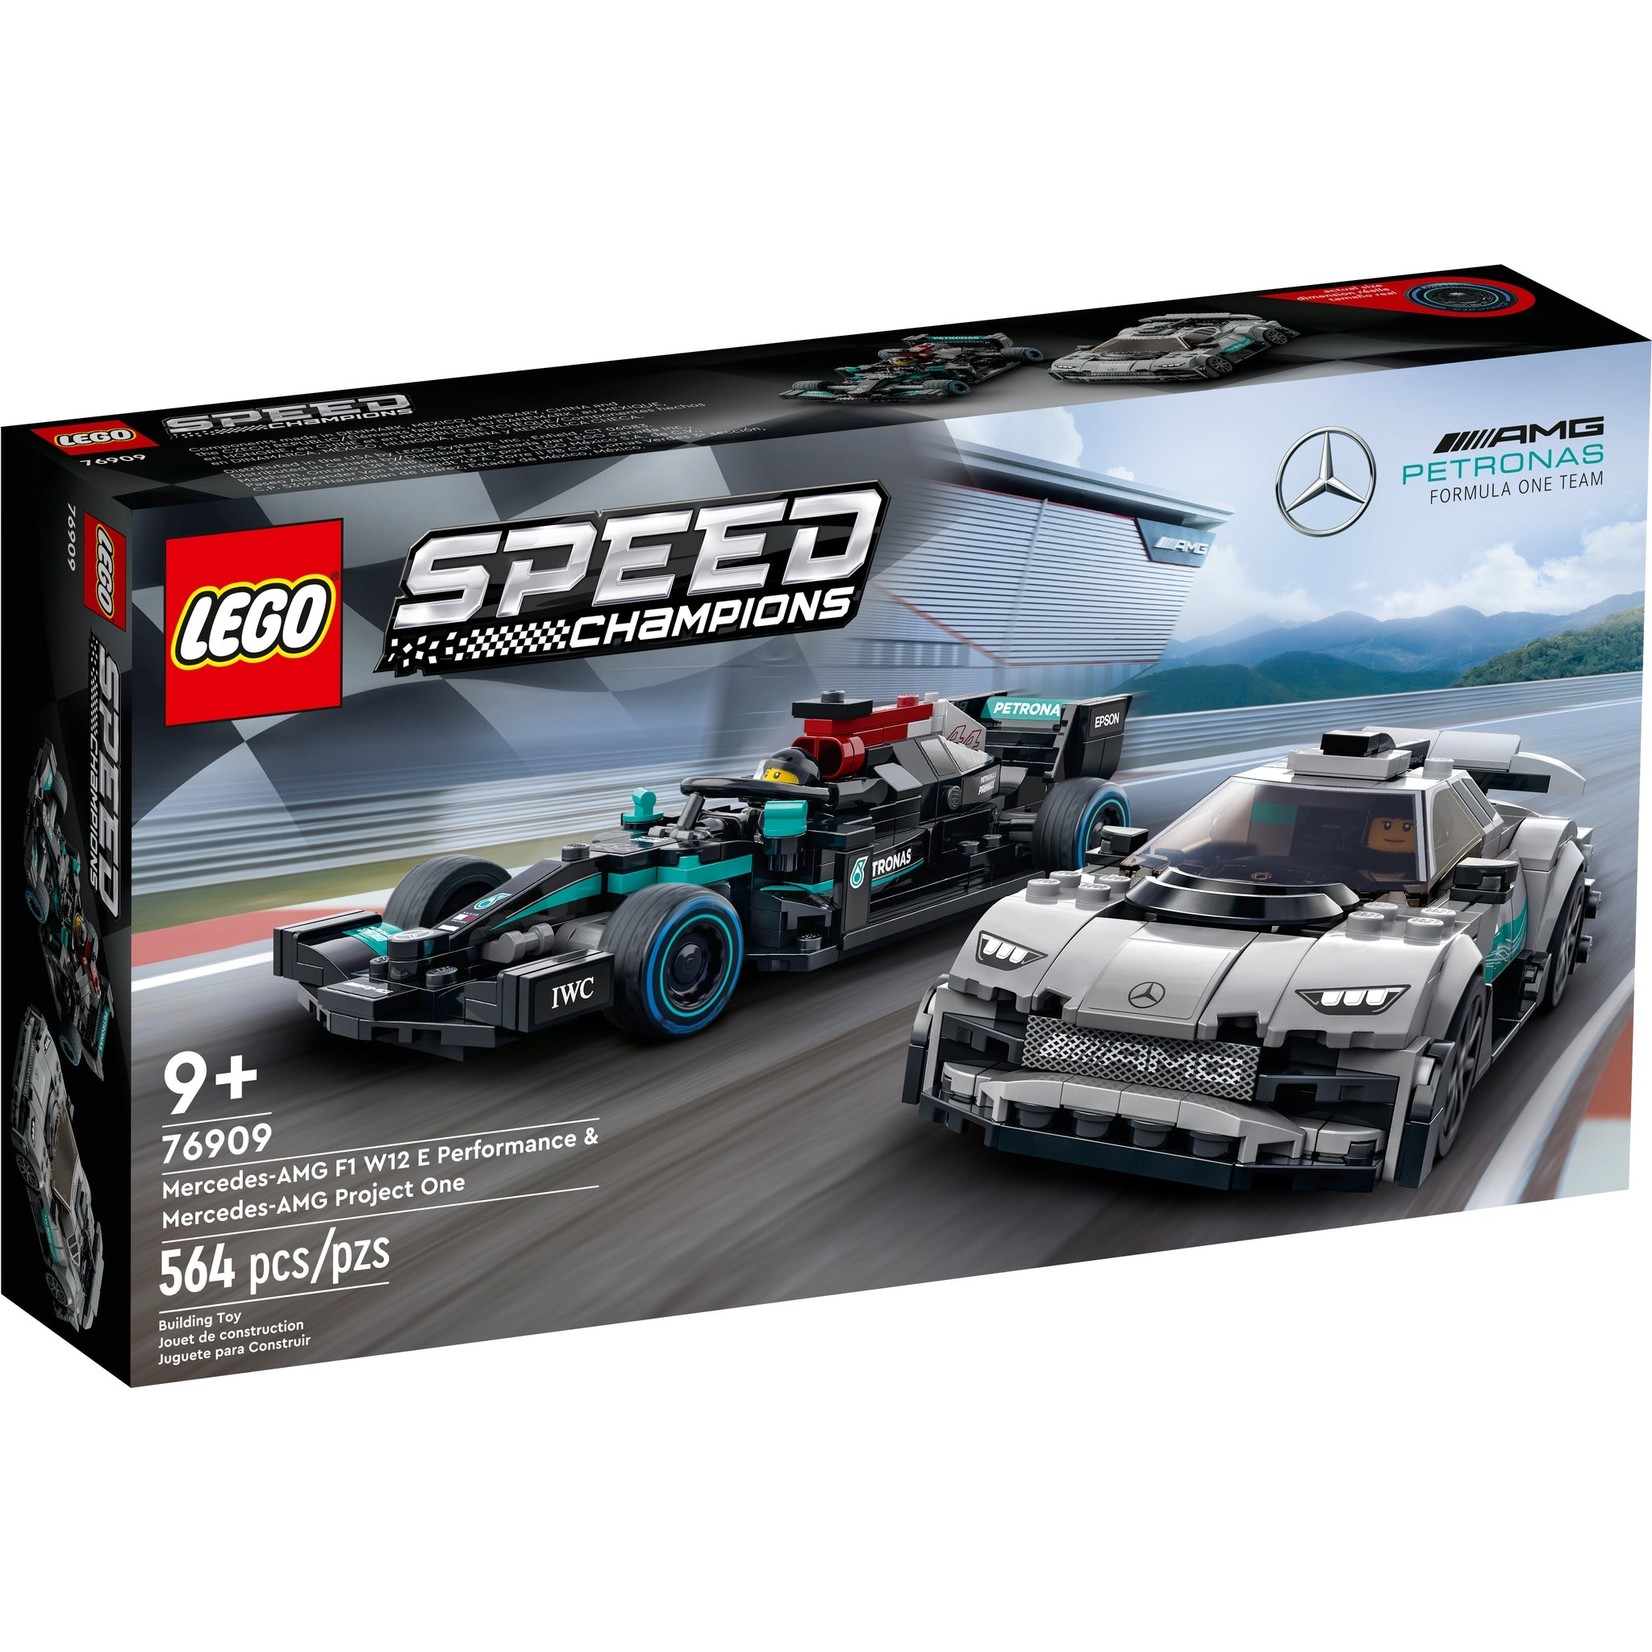 LEGO LEGO Speed Champions Mercedes AMG F1 W12 E Performance & Mercedes AMG Project One 76909